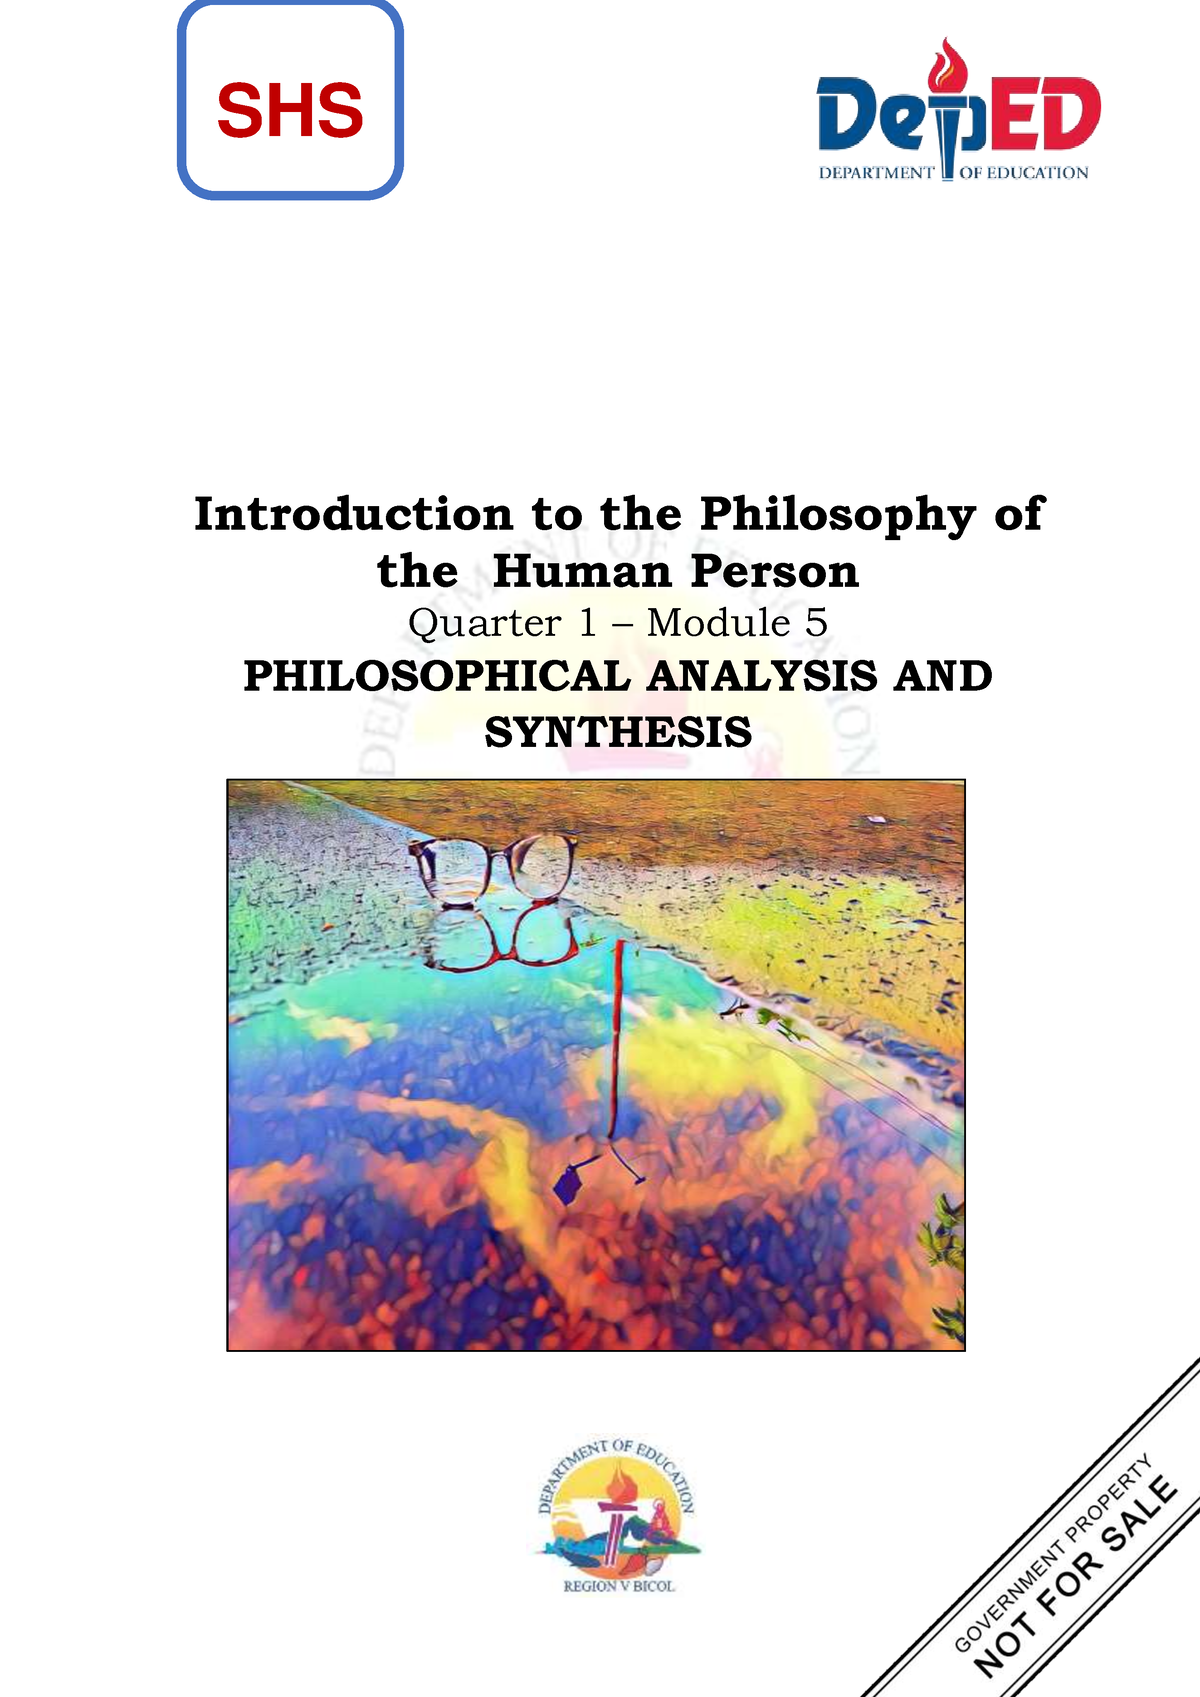 Philo Q1 M5 Wiwiix7duc Introduction To The Philosophy Of The Human Person Quarter 1 Module 5453